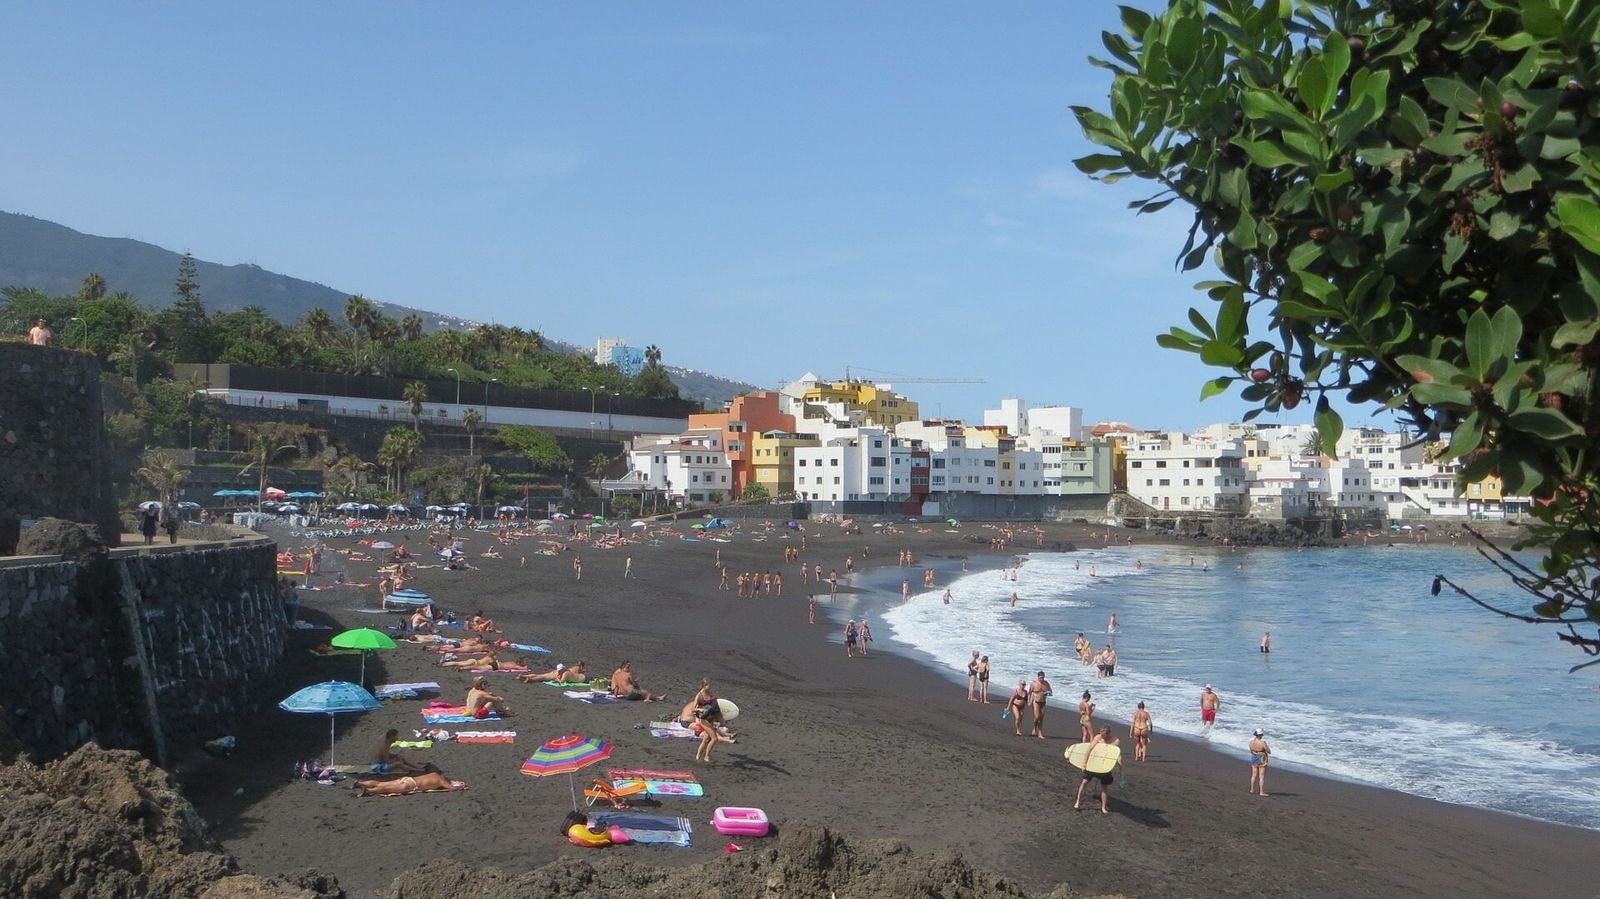 Car hire in \nCanary Islands